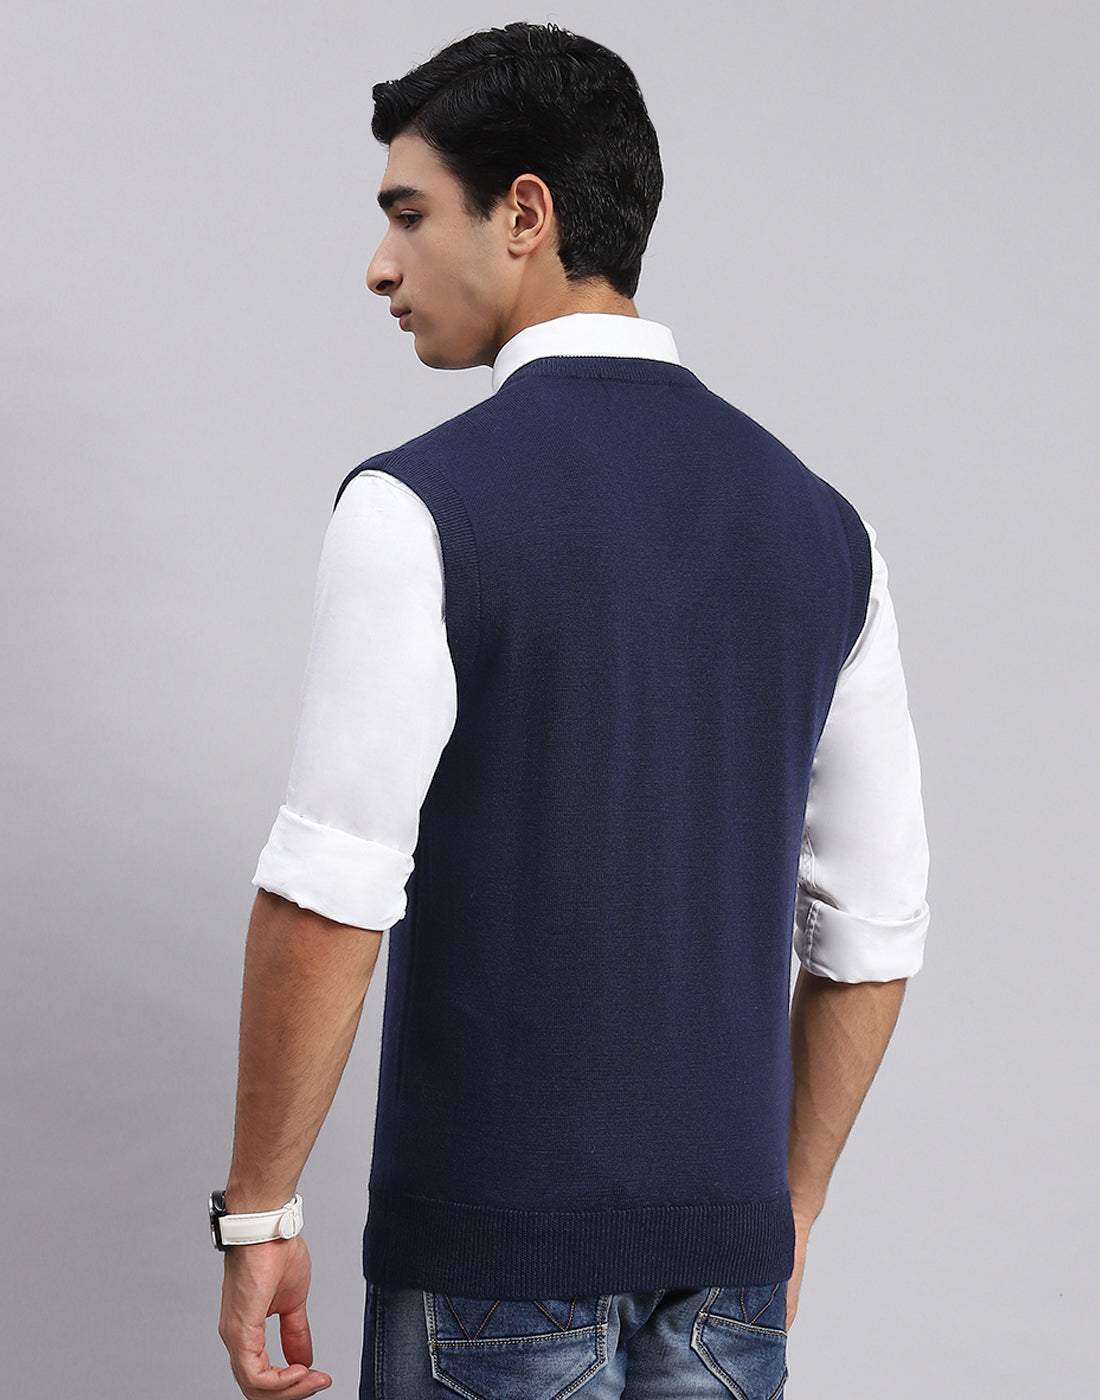 Men Navy Blue Solid V Neck Sleeveless Sweaters/Pullovers